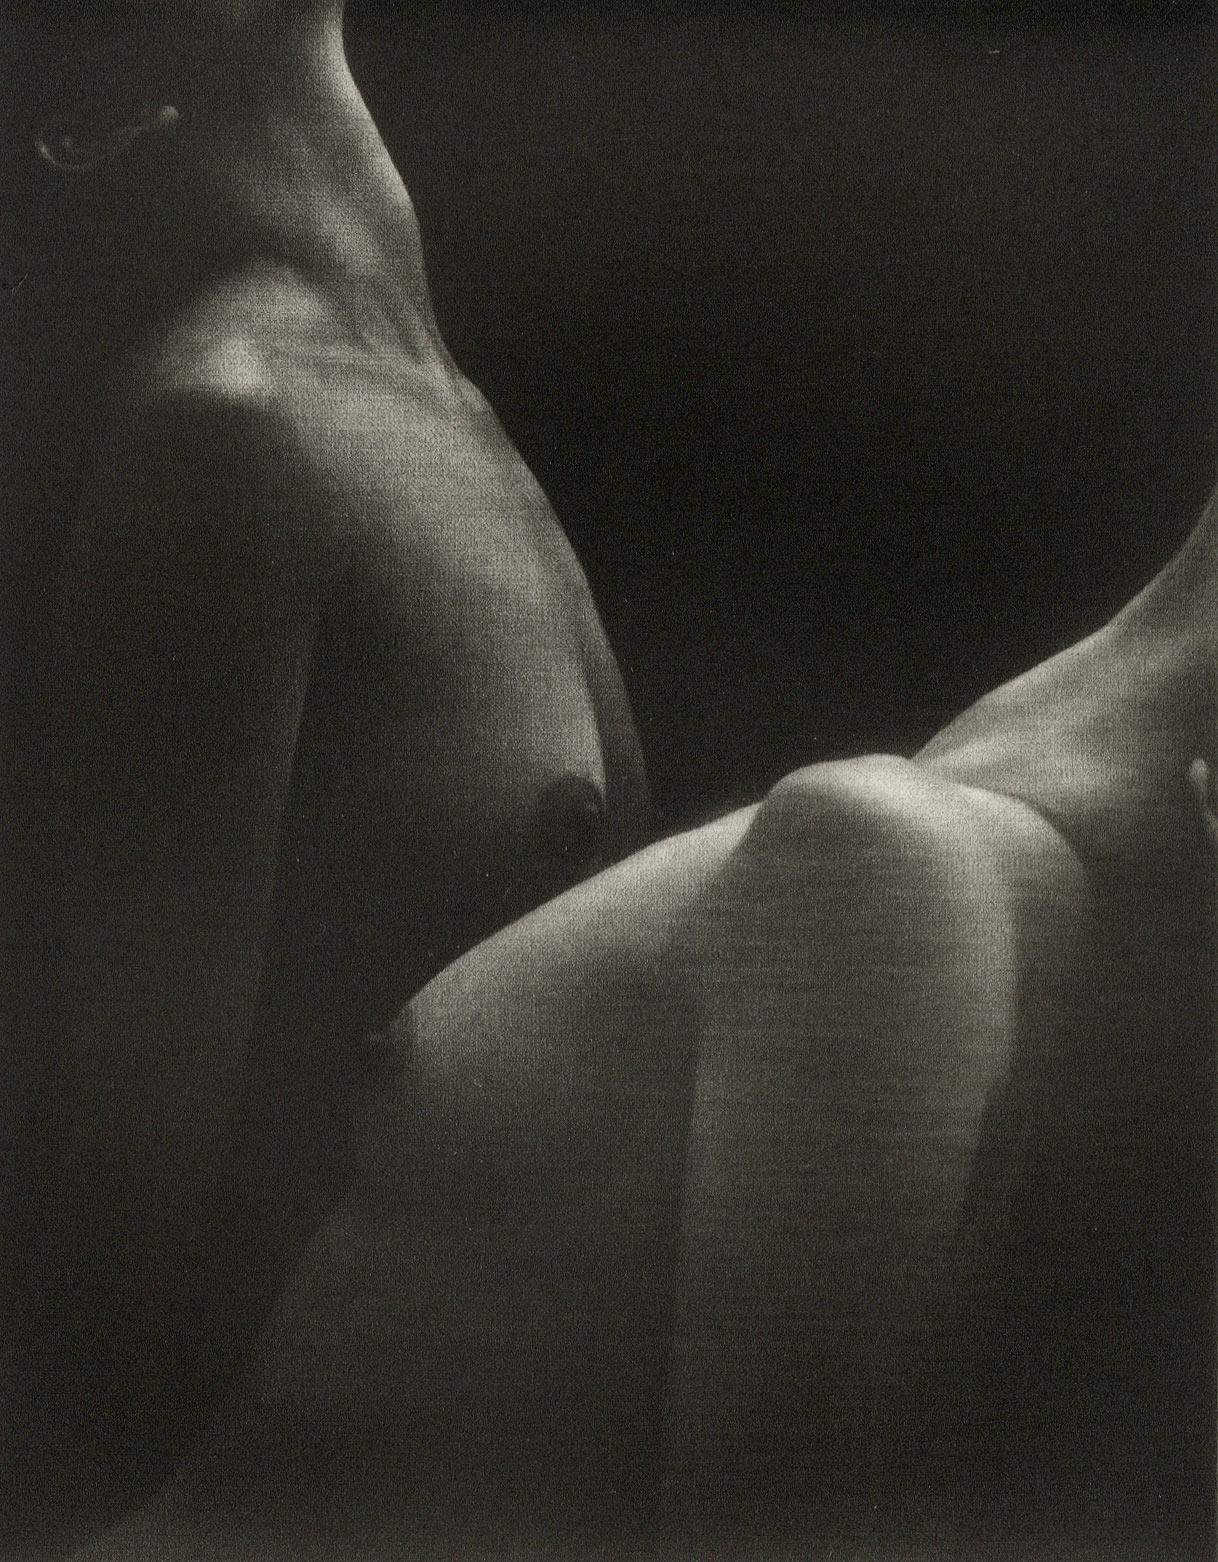 Mikio Watanabe Nude Prints - 15 For Sale at 1stDibs